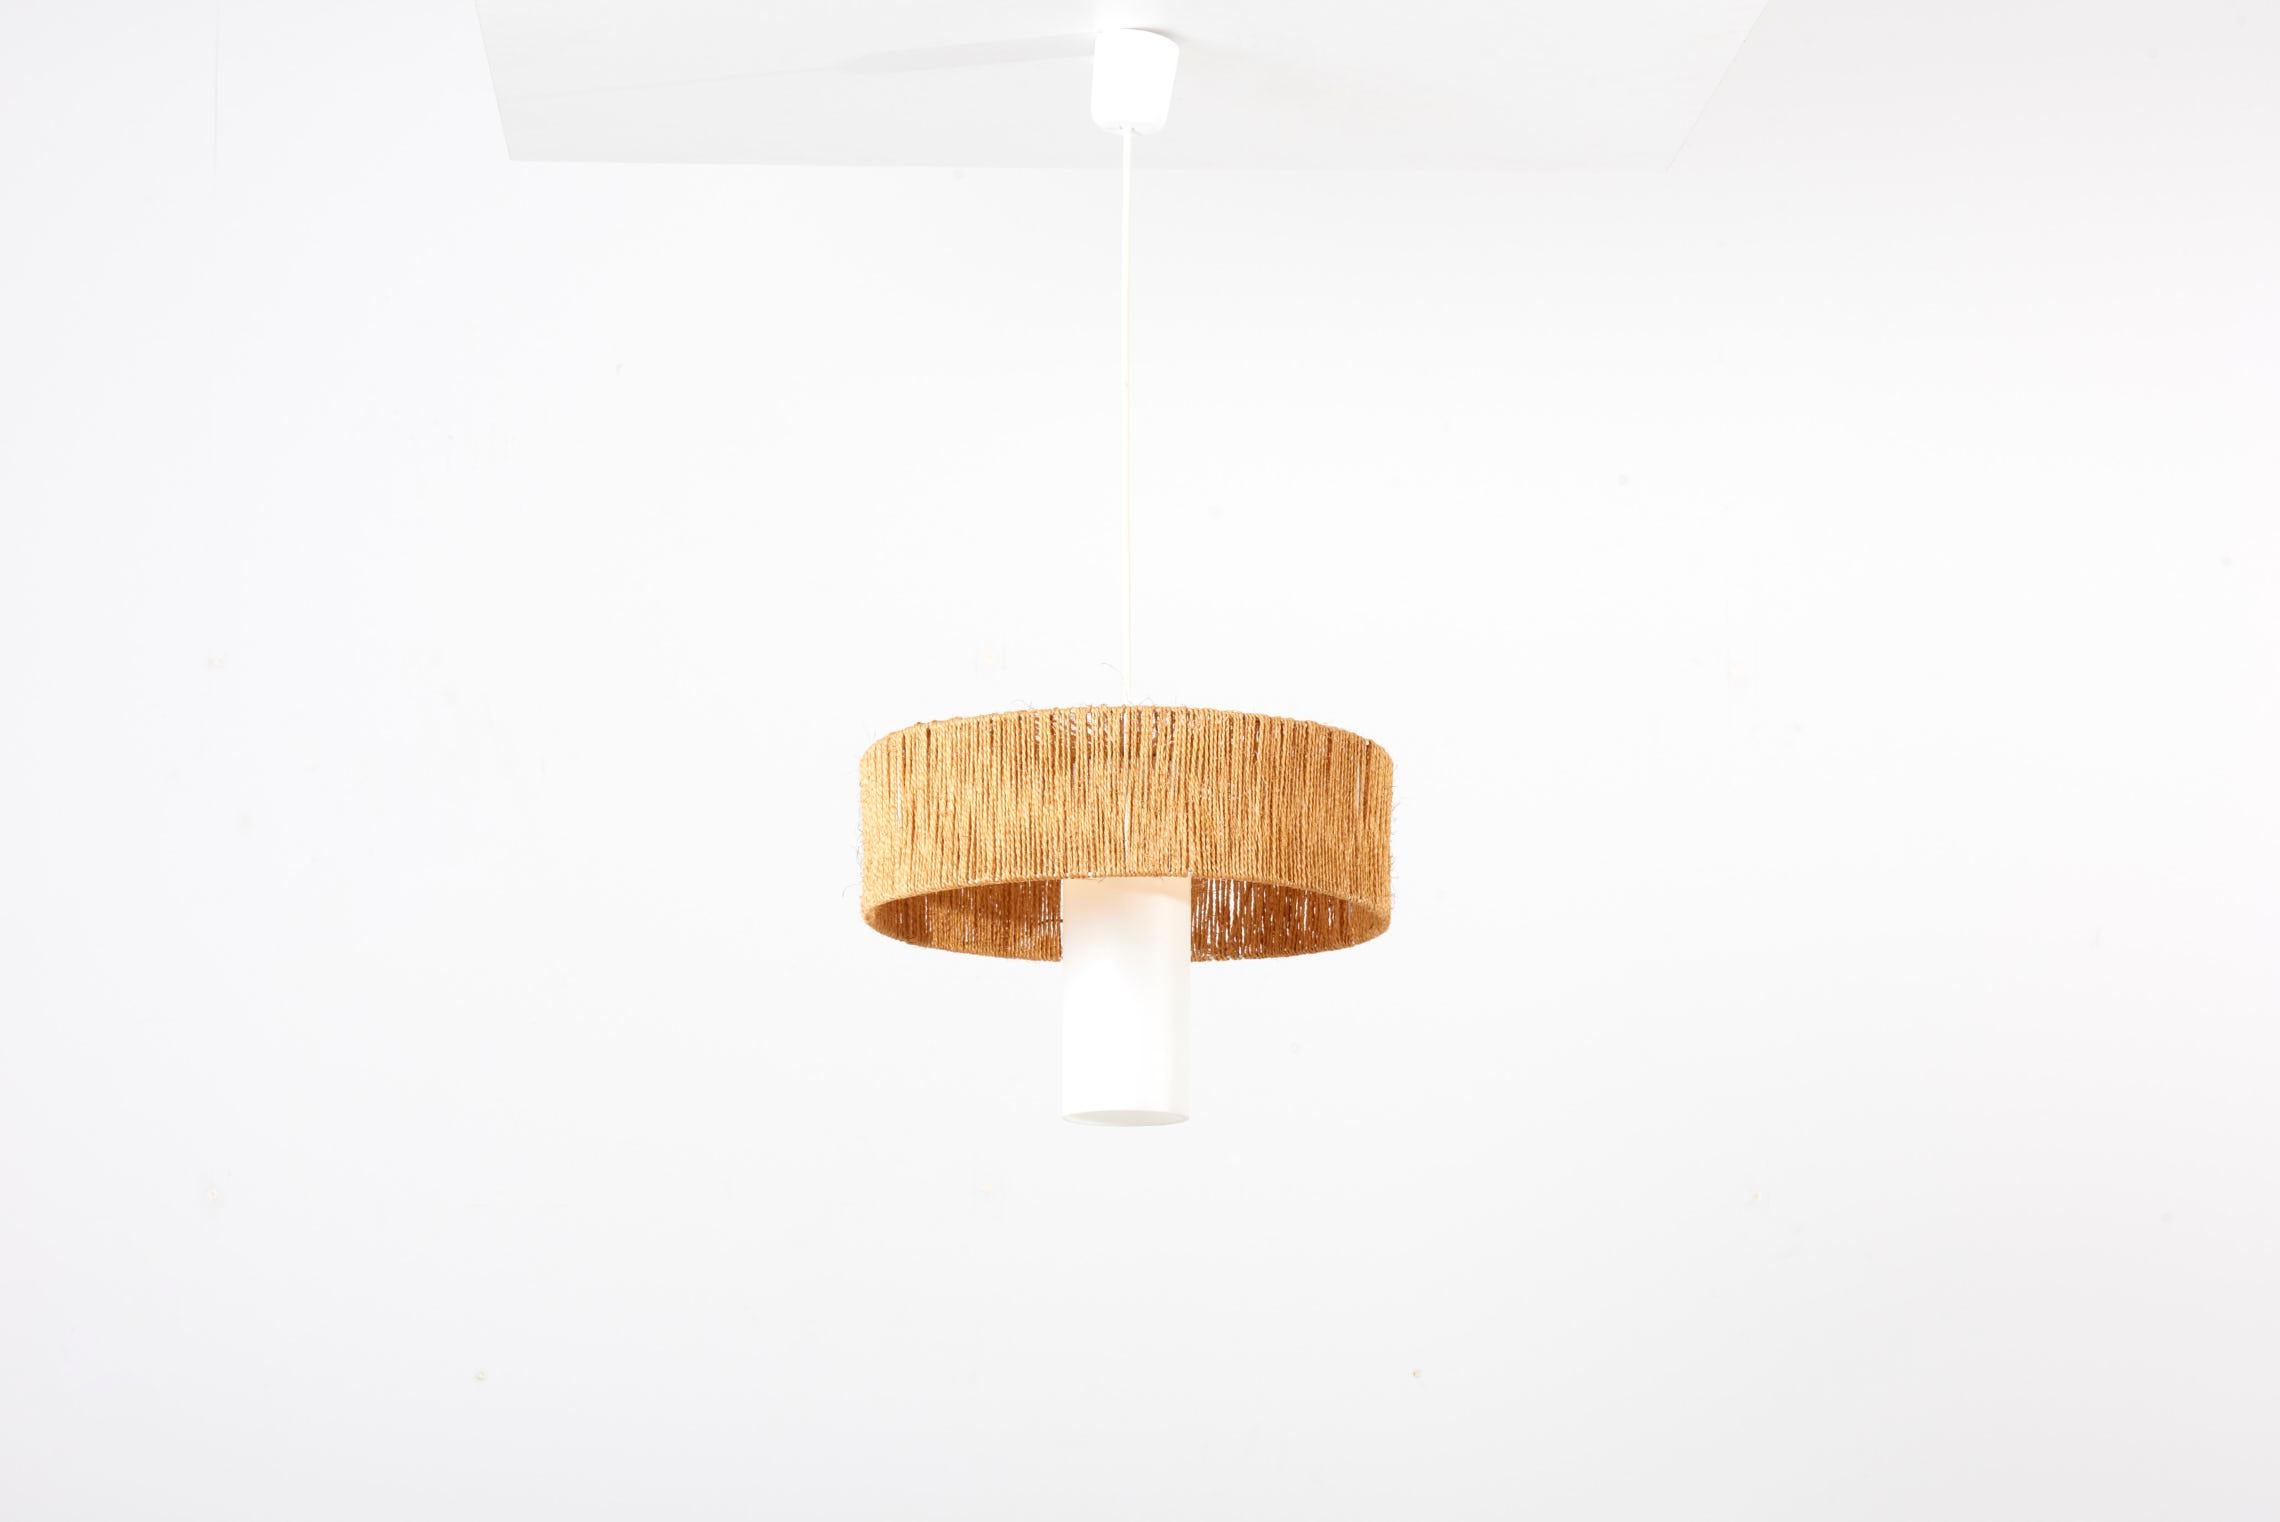 Temde Teak and Sisal pendant lamp, Switzerland 1950s. This Lamp has a glass cylinder as a diffuser and is in very good condition. The height given applies to the sisal shade including the glass cylinder. 